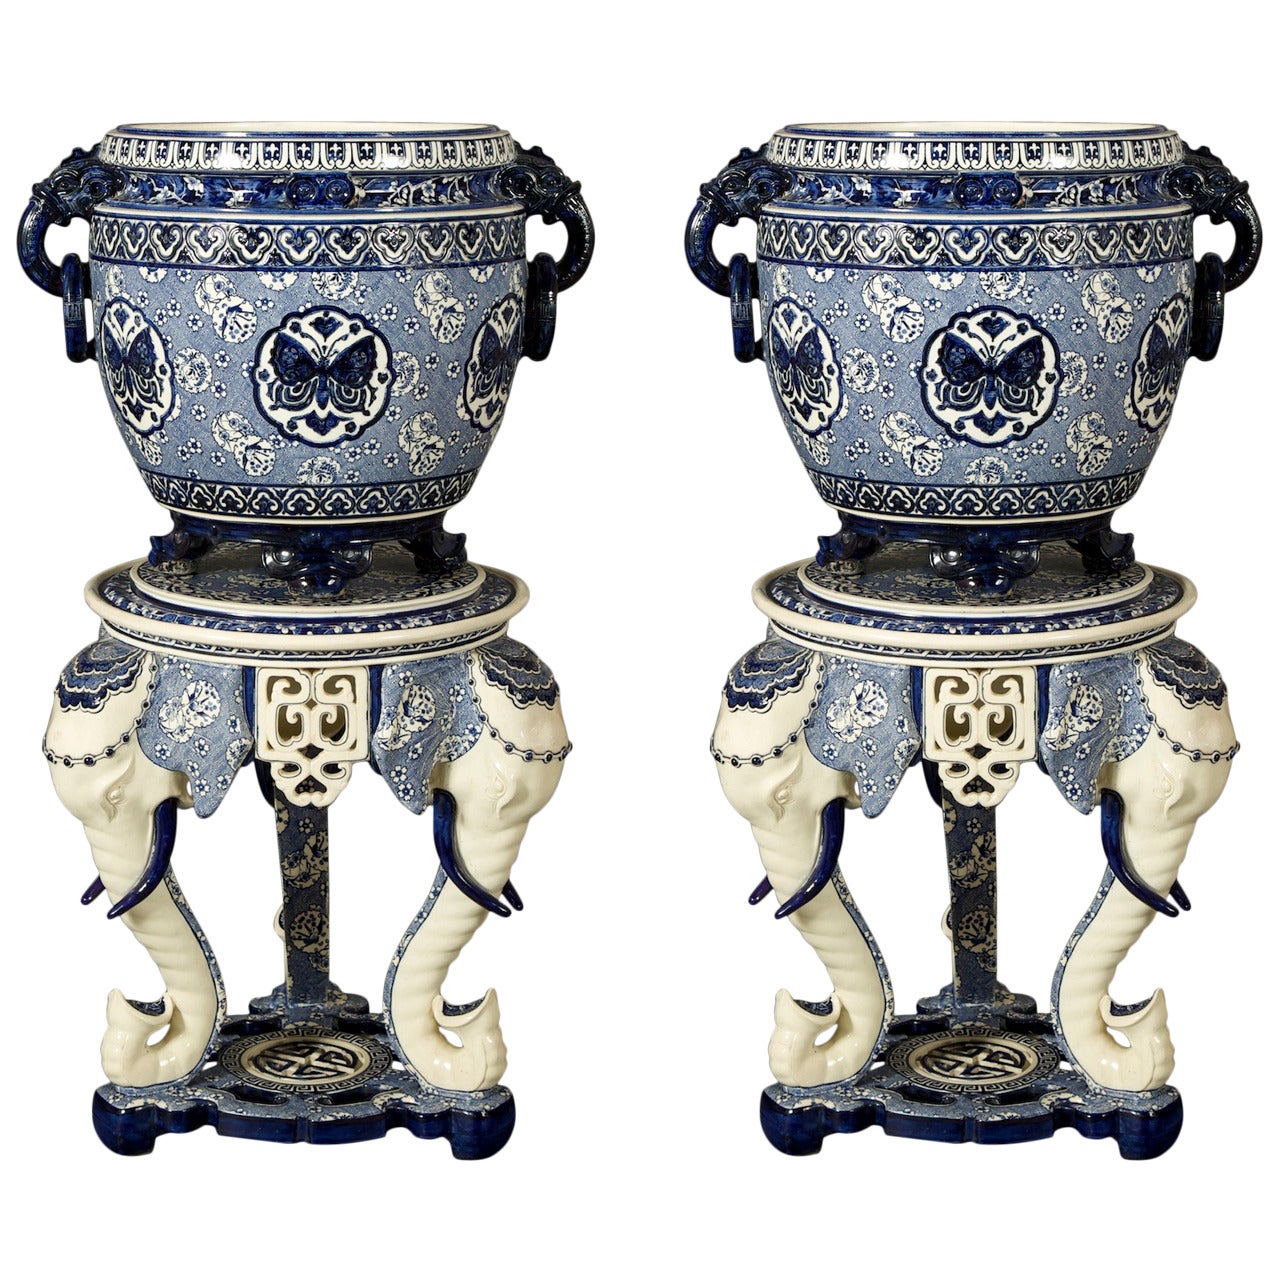 Pair of Minton Majolica Jardinieres on Elephant-Form Tripod Pedestals For Sale